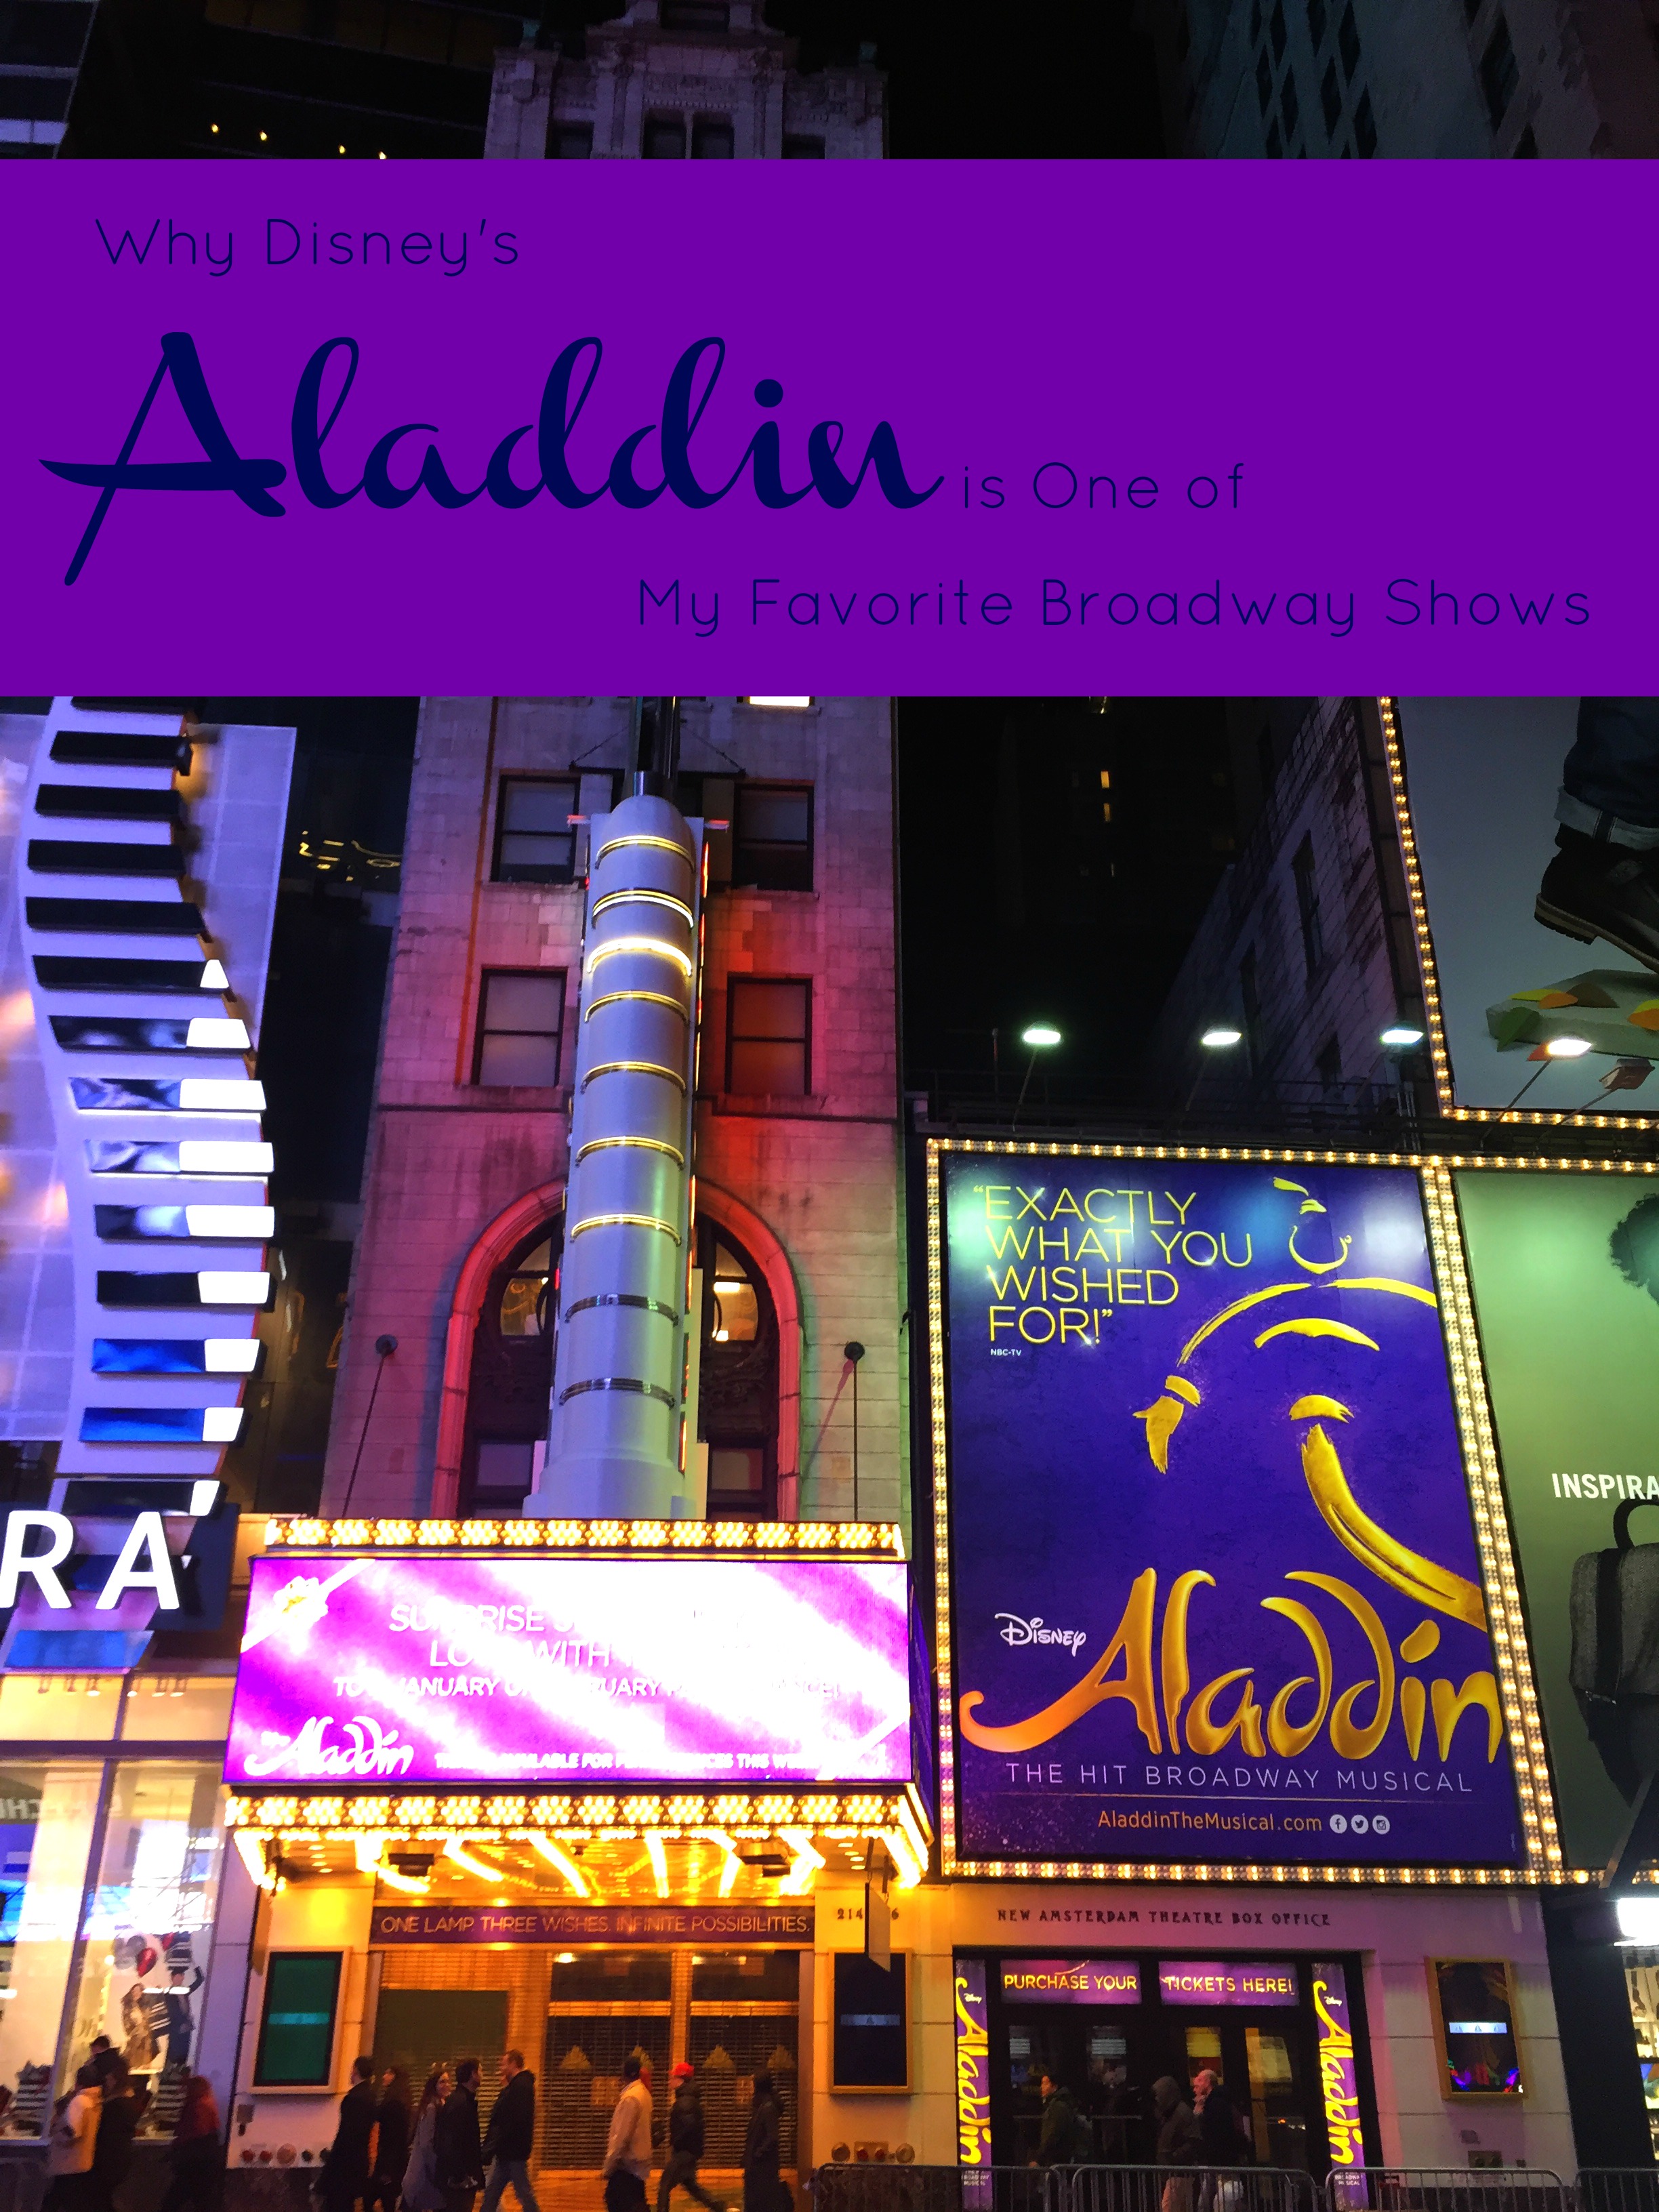 Disney's Aladdin the Musical at the New Amsterdam Theater on Broadway, NY